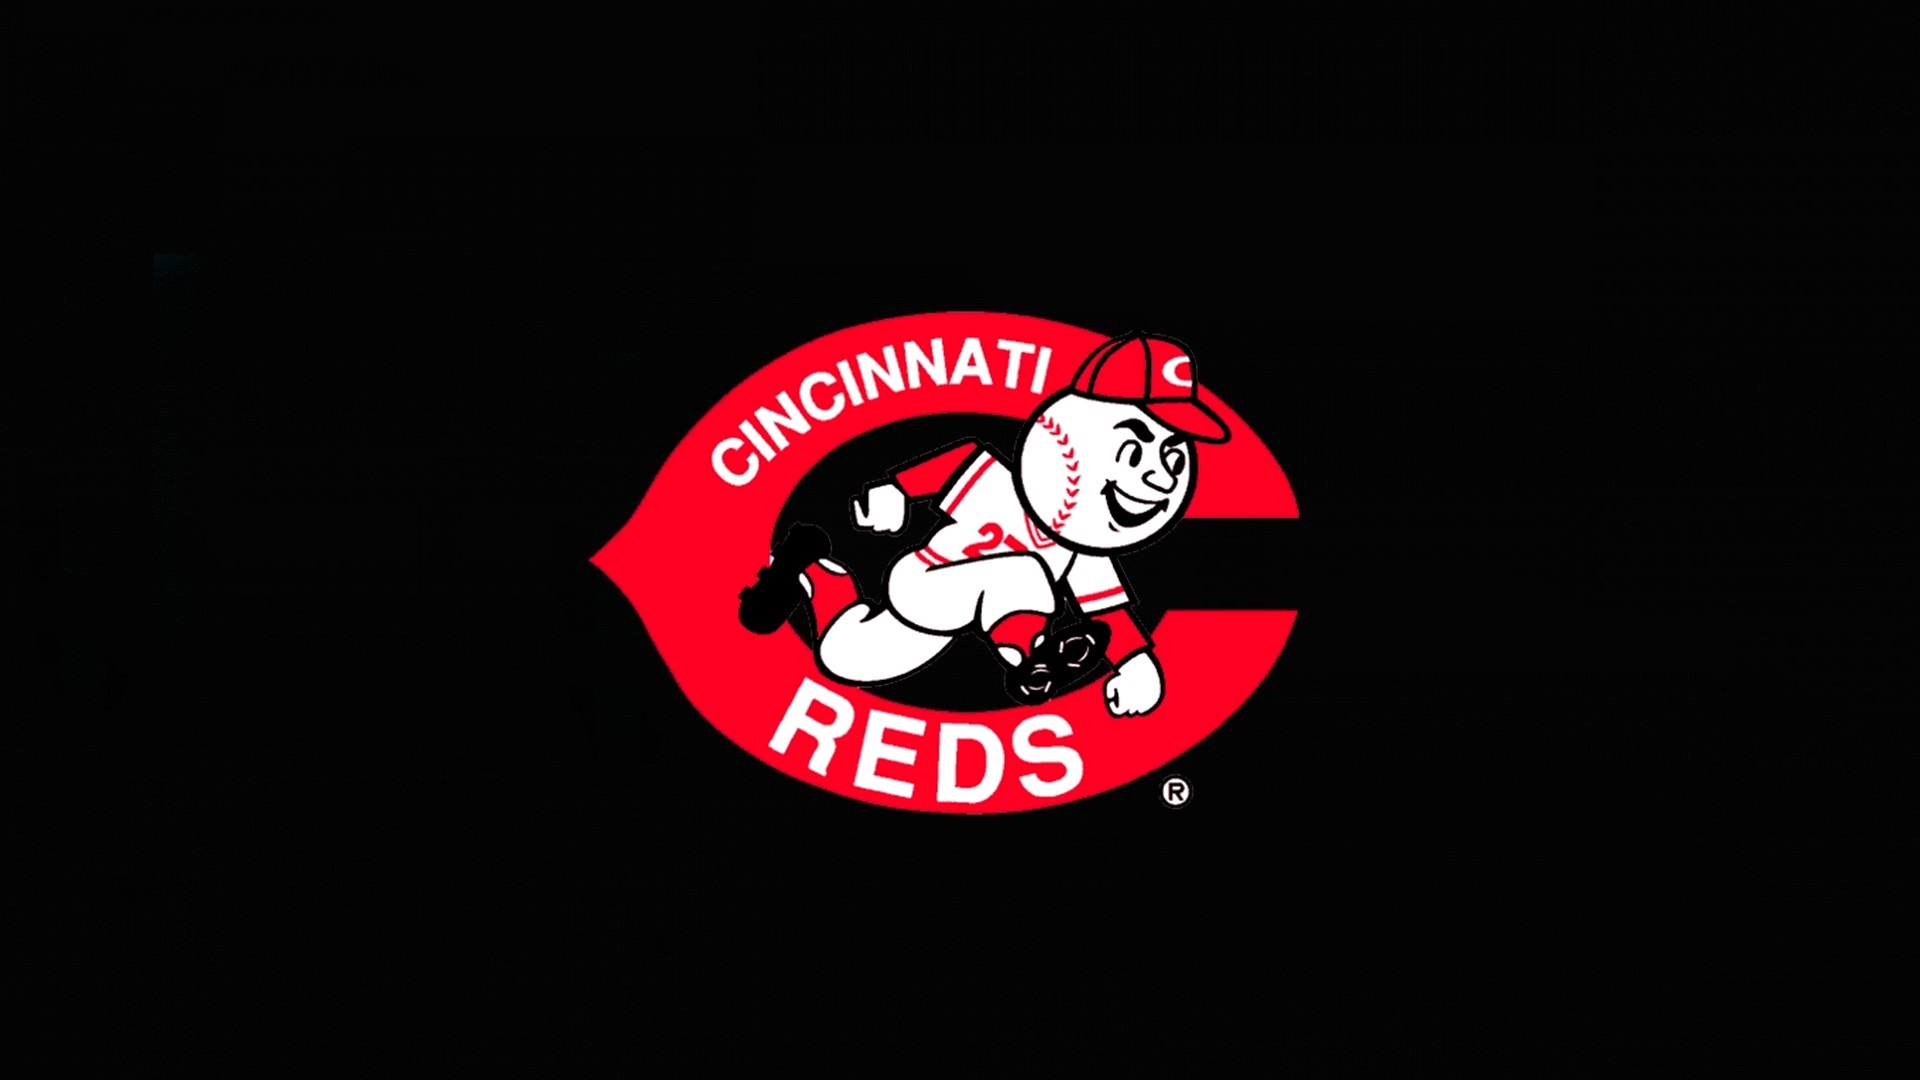 HD Backgrounds Cincinnati Reds With high-resolution 1920X1080 pixel. You can use this wallpaper for Mac Desktop Wallpaper, Laptop Screensavers, Android Wallpapers, Tablet or iPhone Home Screen and another mobile phone device